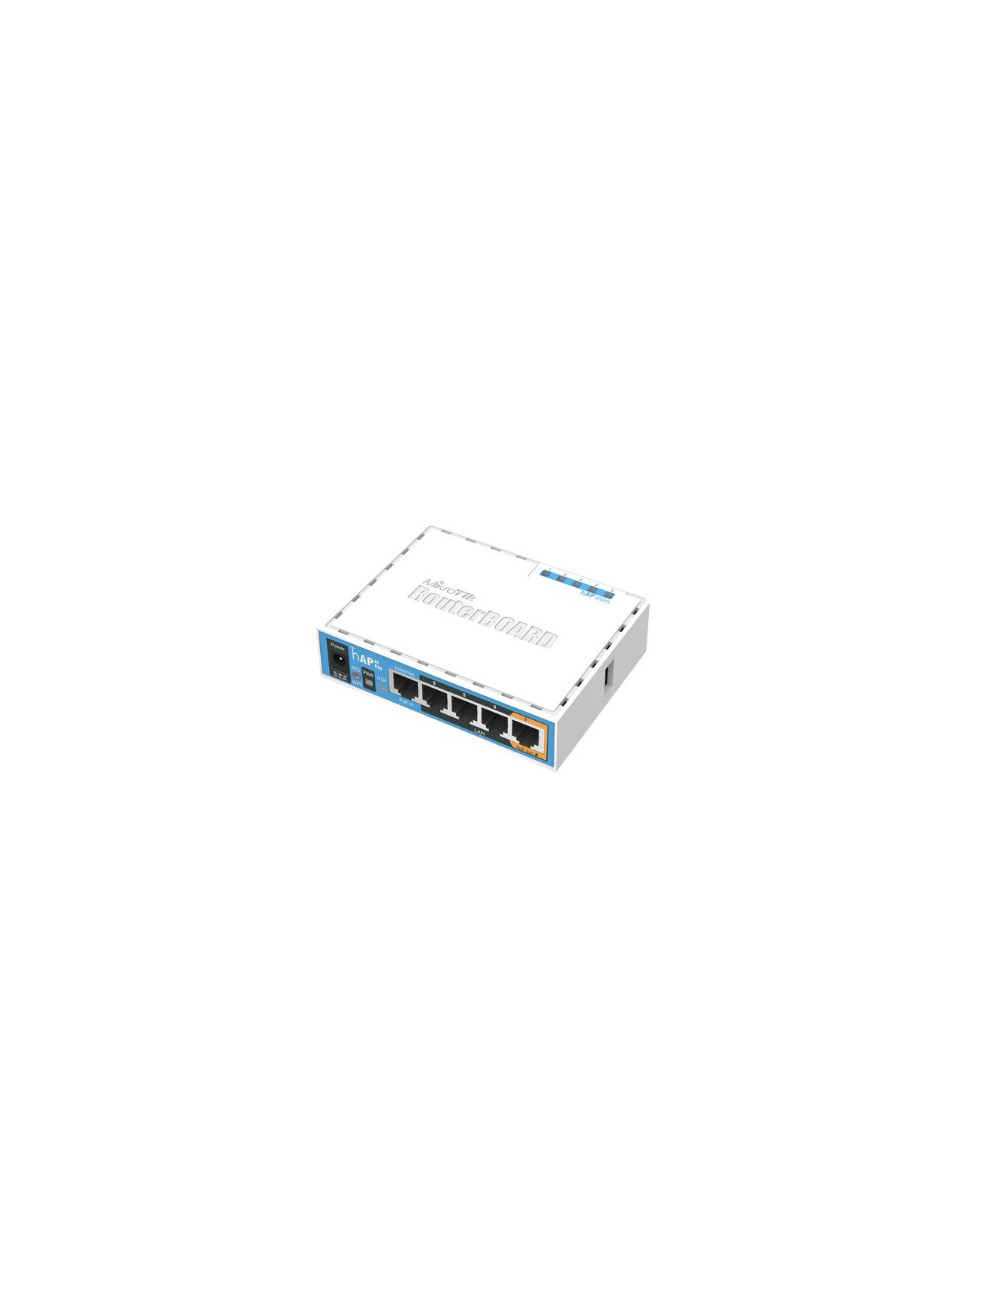 MikroTik RB952Ui-5ac2nD hAP ac lite 802.11ac, 2.4/5.0, 10/100 Mbit/s, Ethernet LAN (RJ-45) ports 5, MU-MiMO Yes, PoE in/out